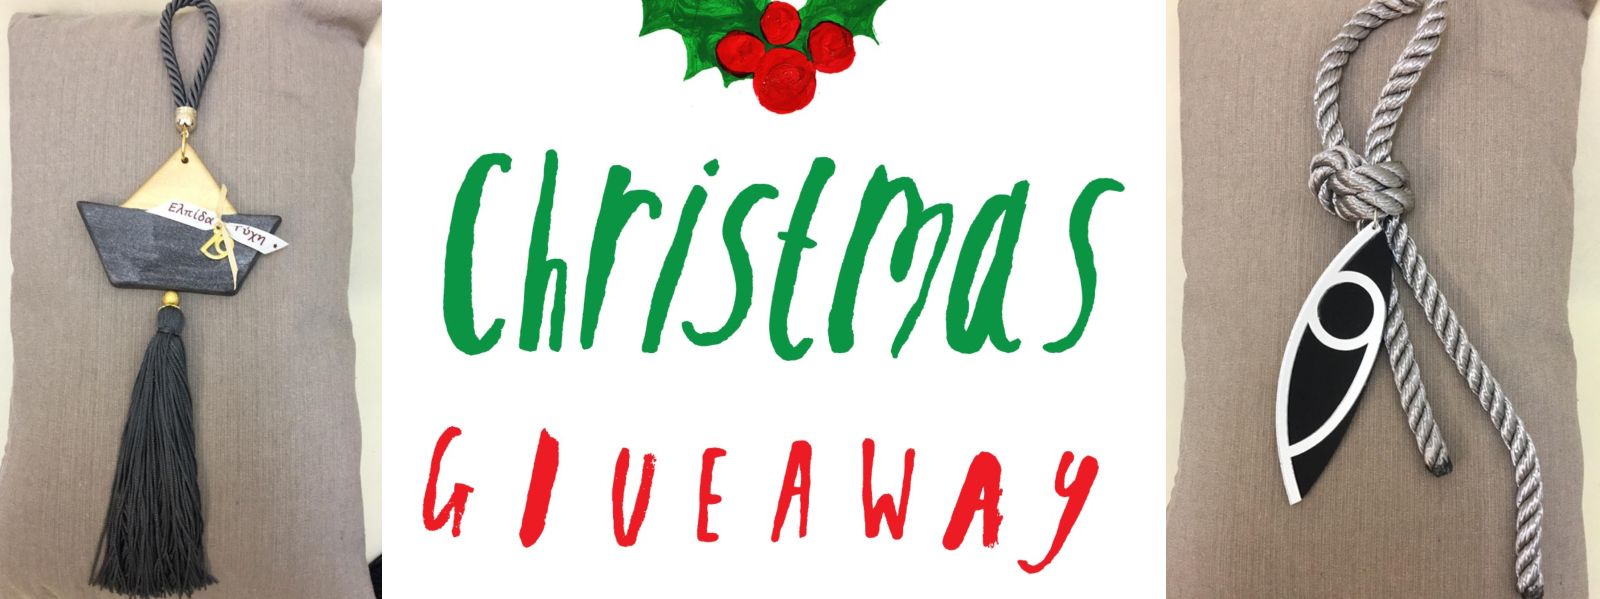 images easyblog articles 7031 christmas giveaway andioropoulos 09f529cd